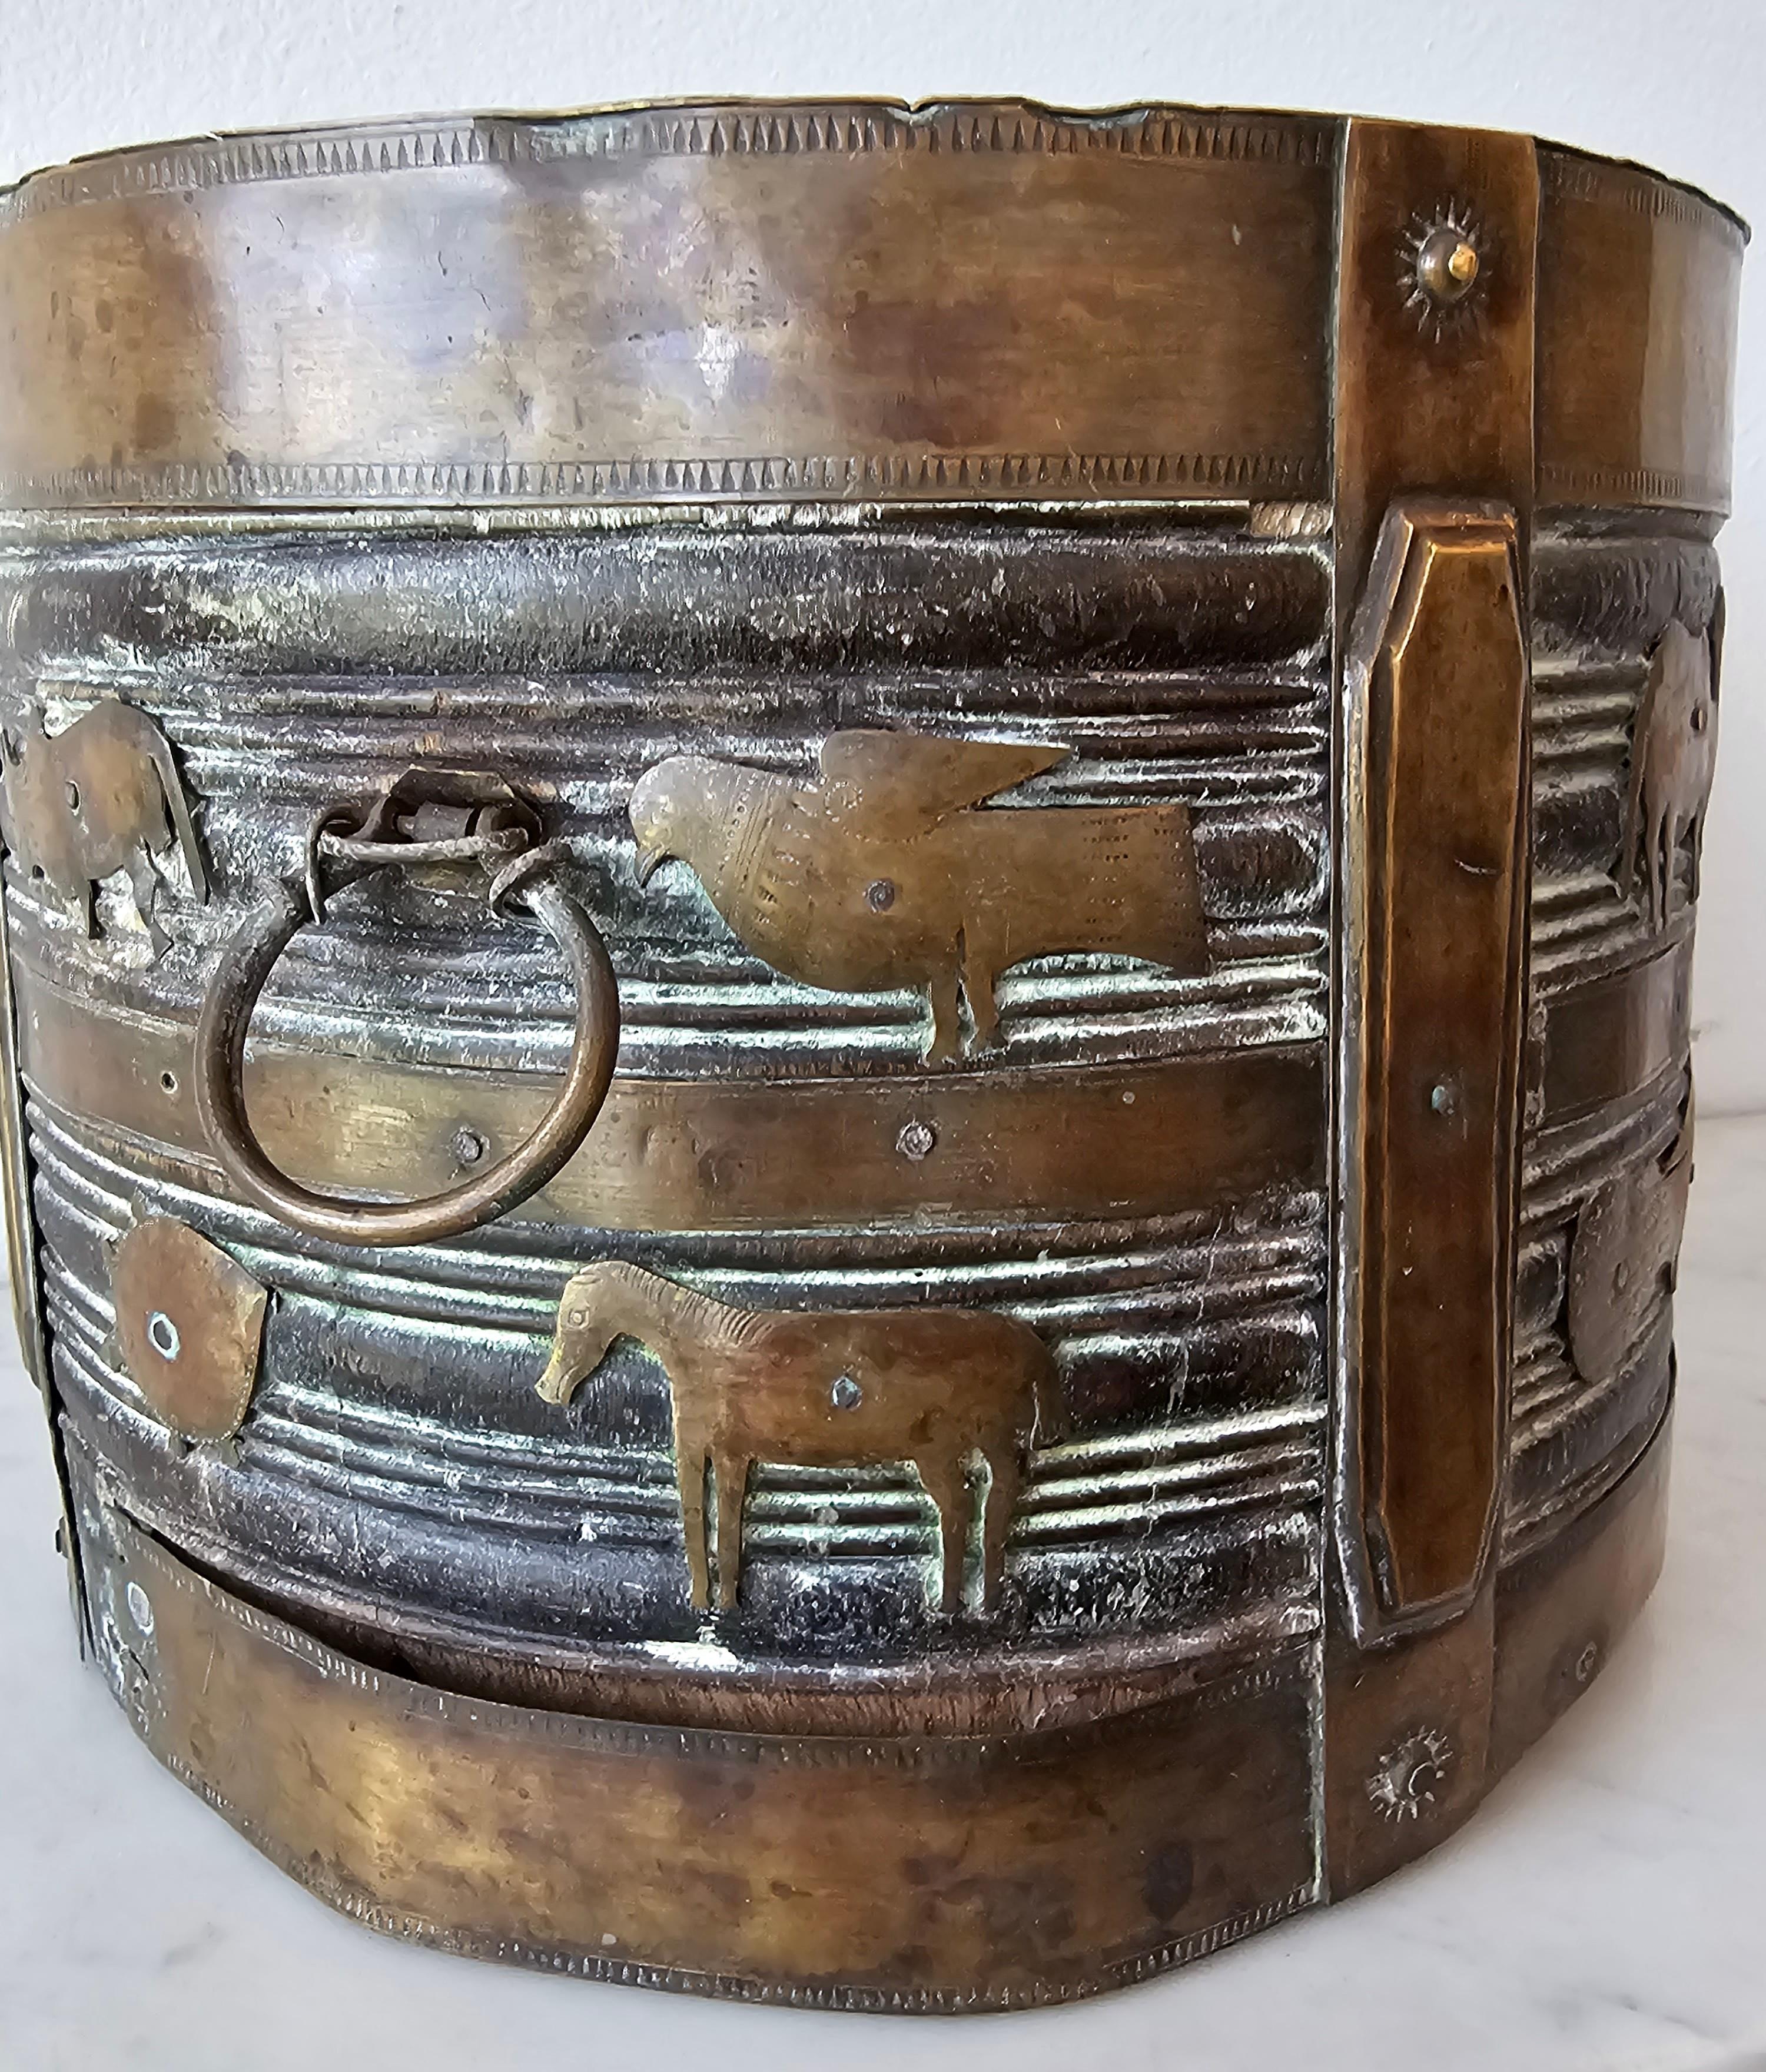 Scarce British Colonial India Brass-Mounted Log Bucket Fireplace Pail For Sale 2